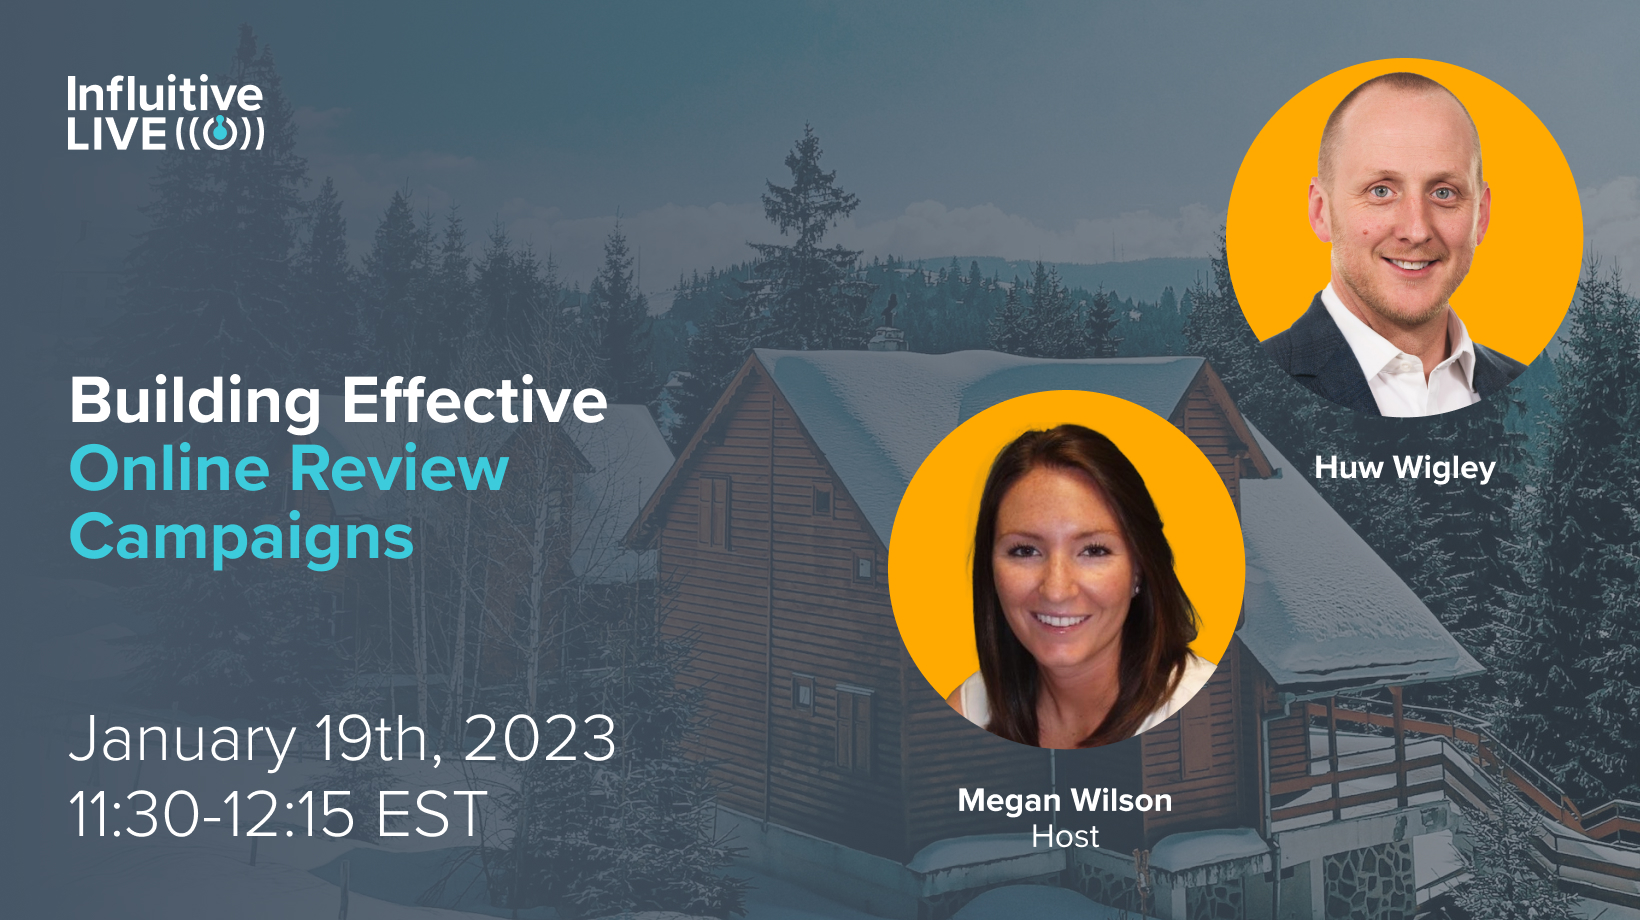 "Building Effective Online Review Campaigns<br />
– Megan Wilson (Influitive), Huw Wigley (SUSE)"